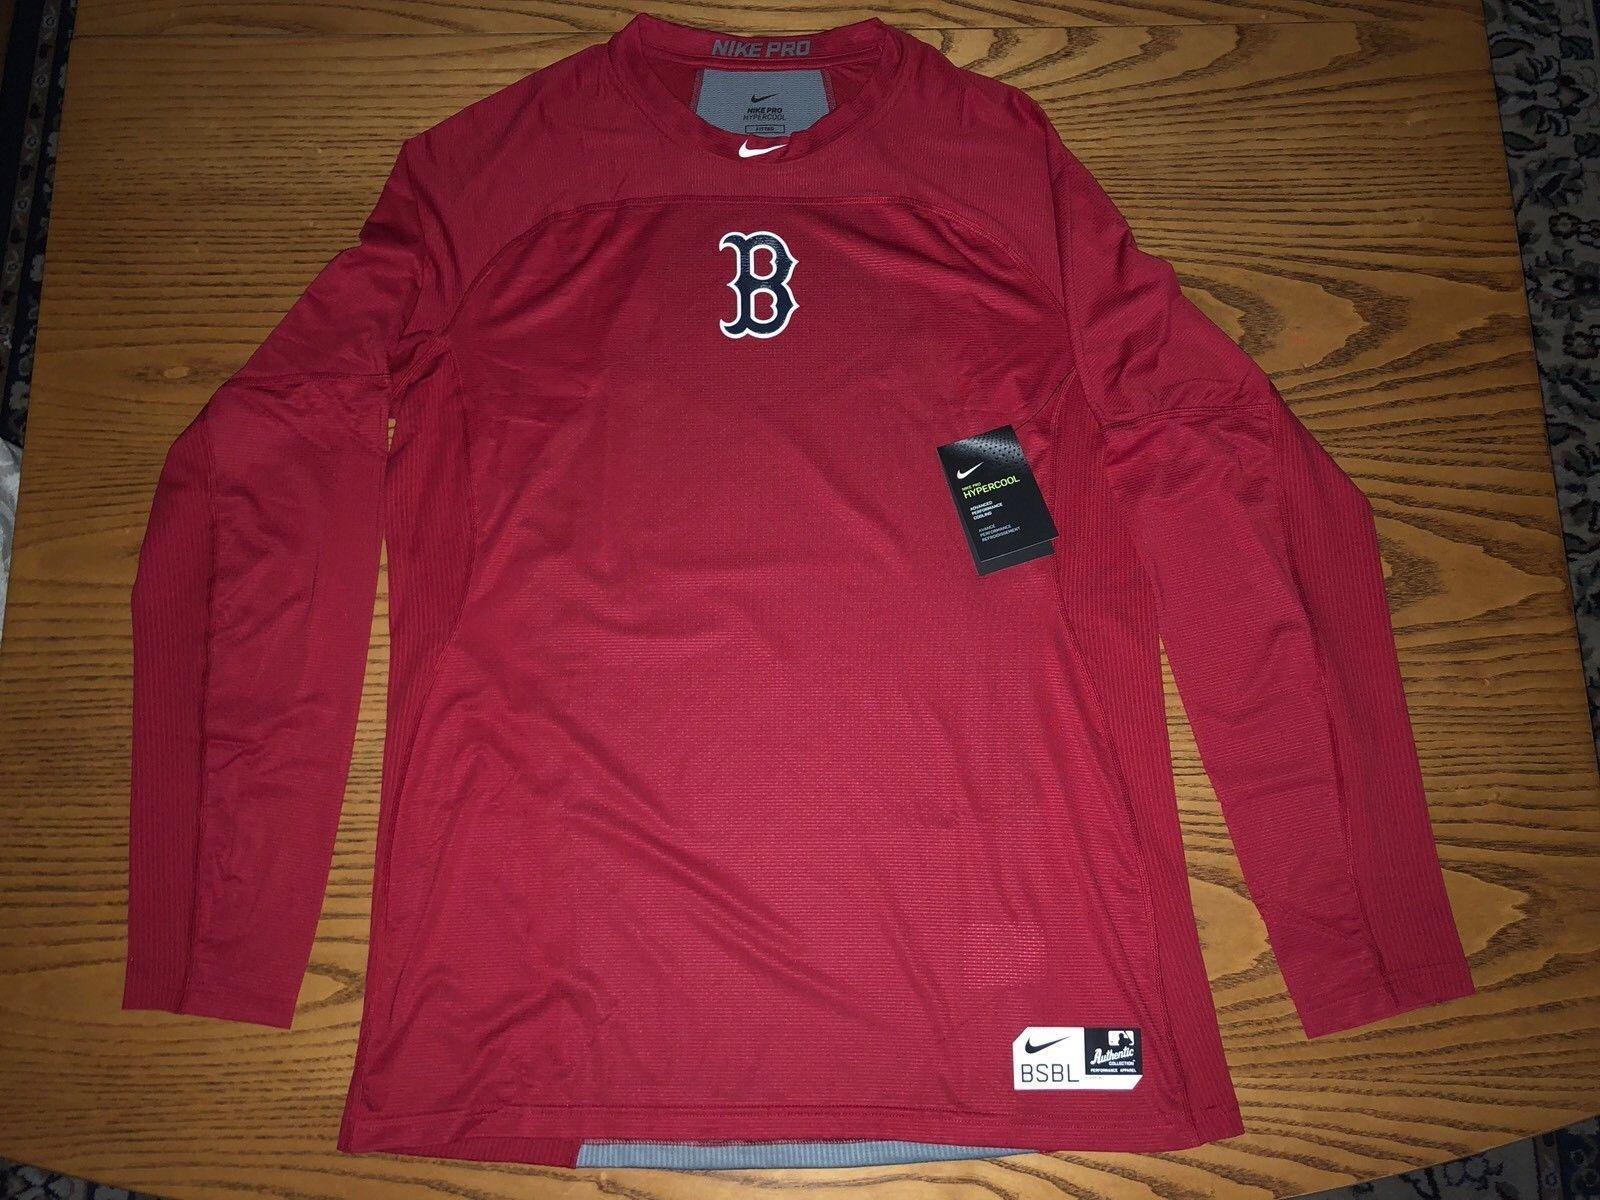 An L Clothing and Apparel Logo - 35.00. NIKE PRO BOSTON RED SOX MLB HYPER COOL FITTED PERFORMANCE